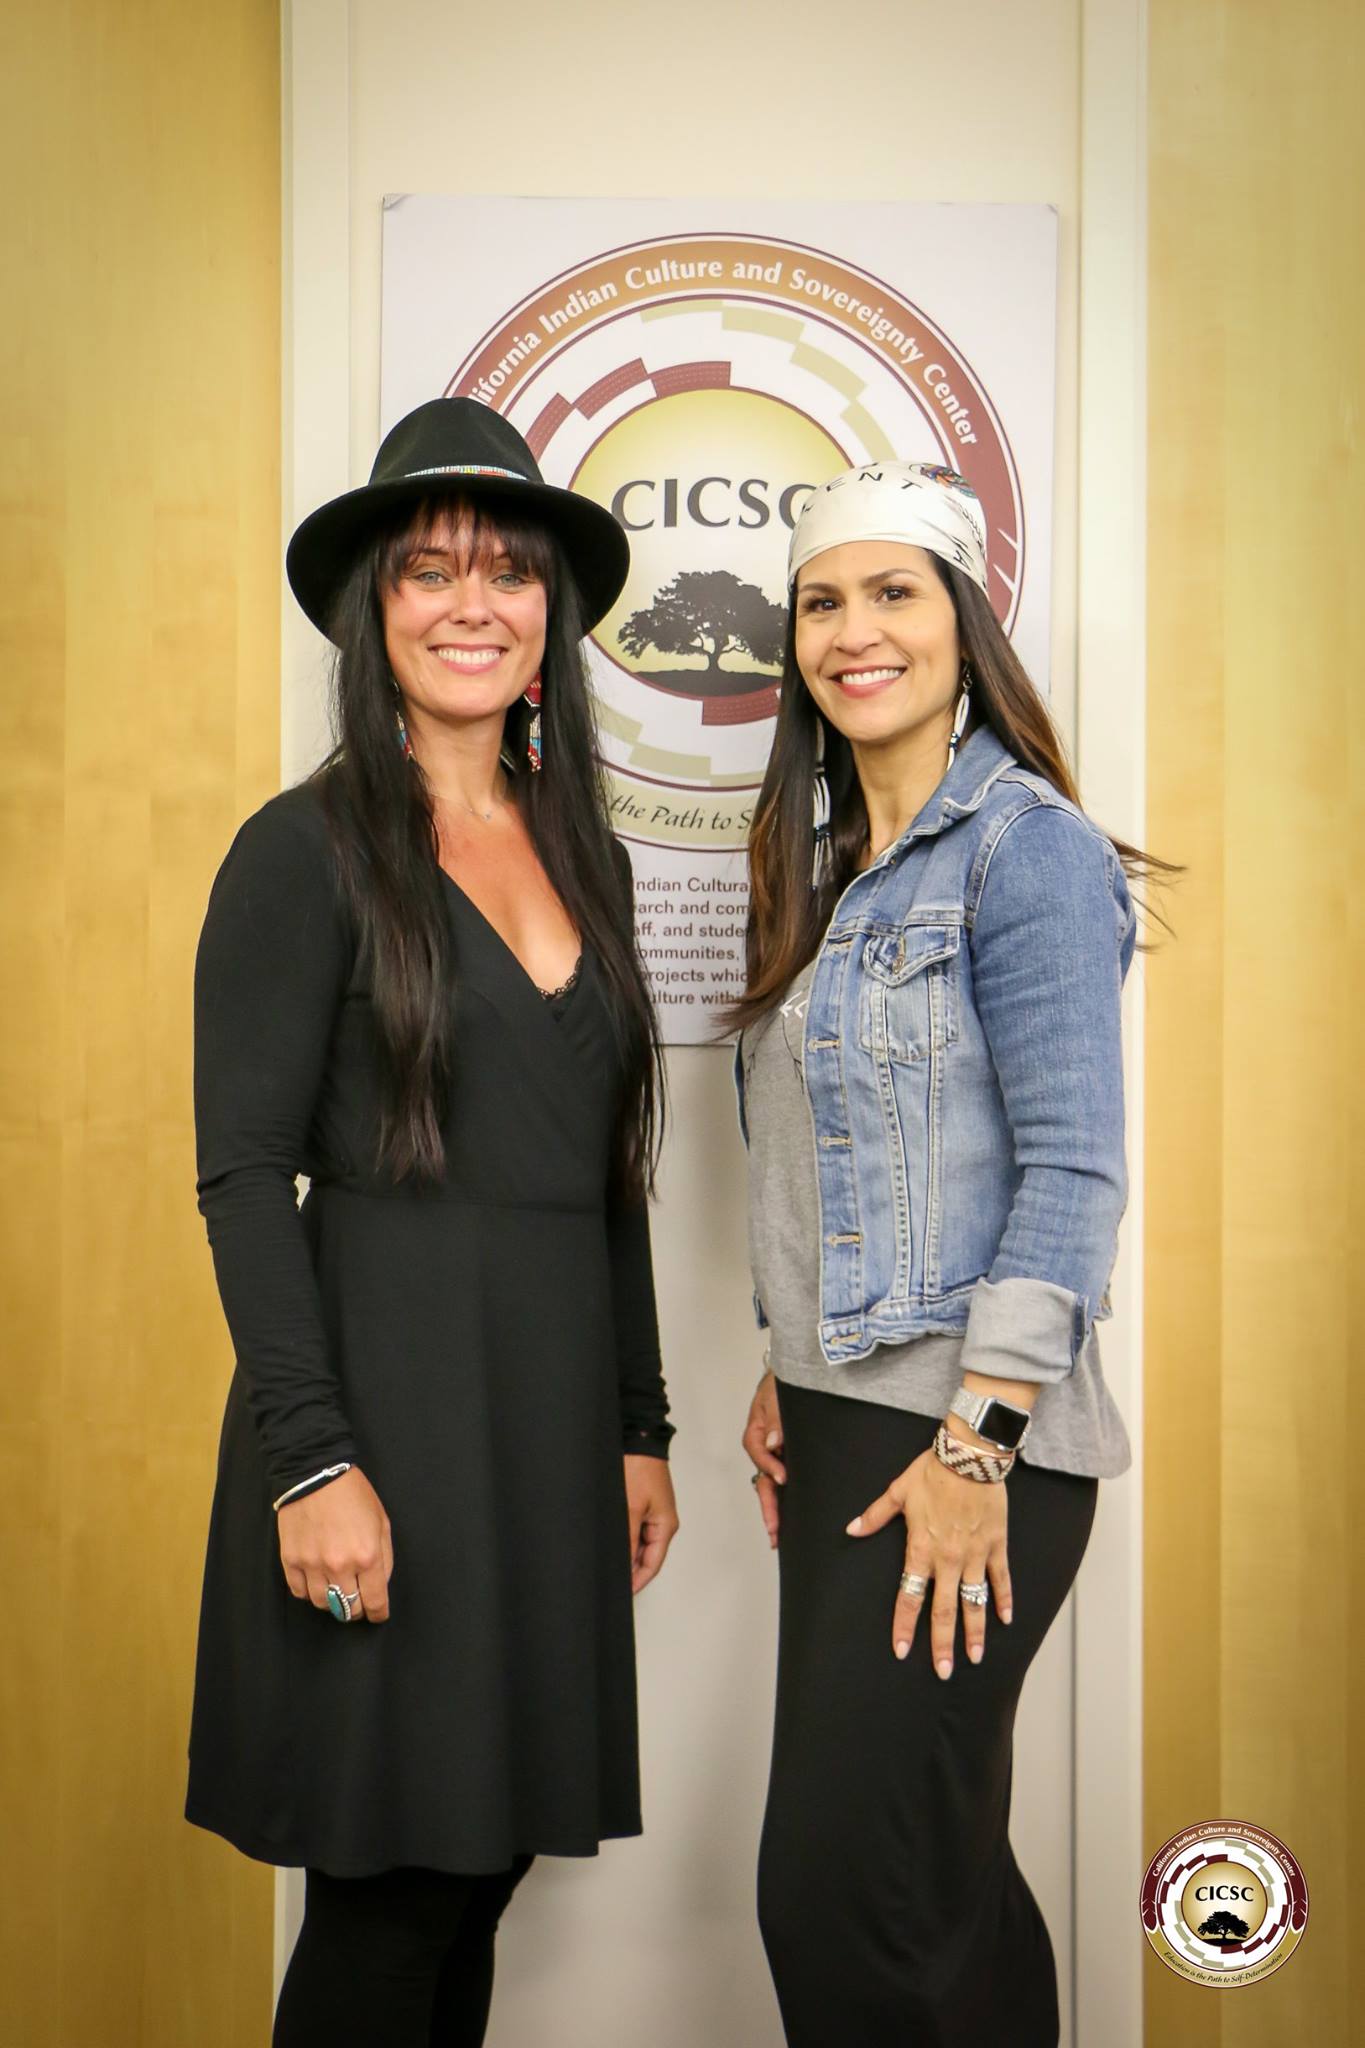 Director Michelle Latimer and CICSC Director Joely Proudfit standing next to one another in front of a CICSC logo sign hanging on a wall